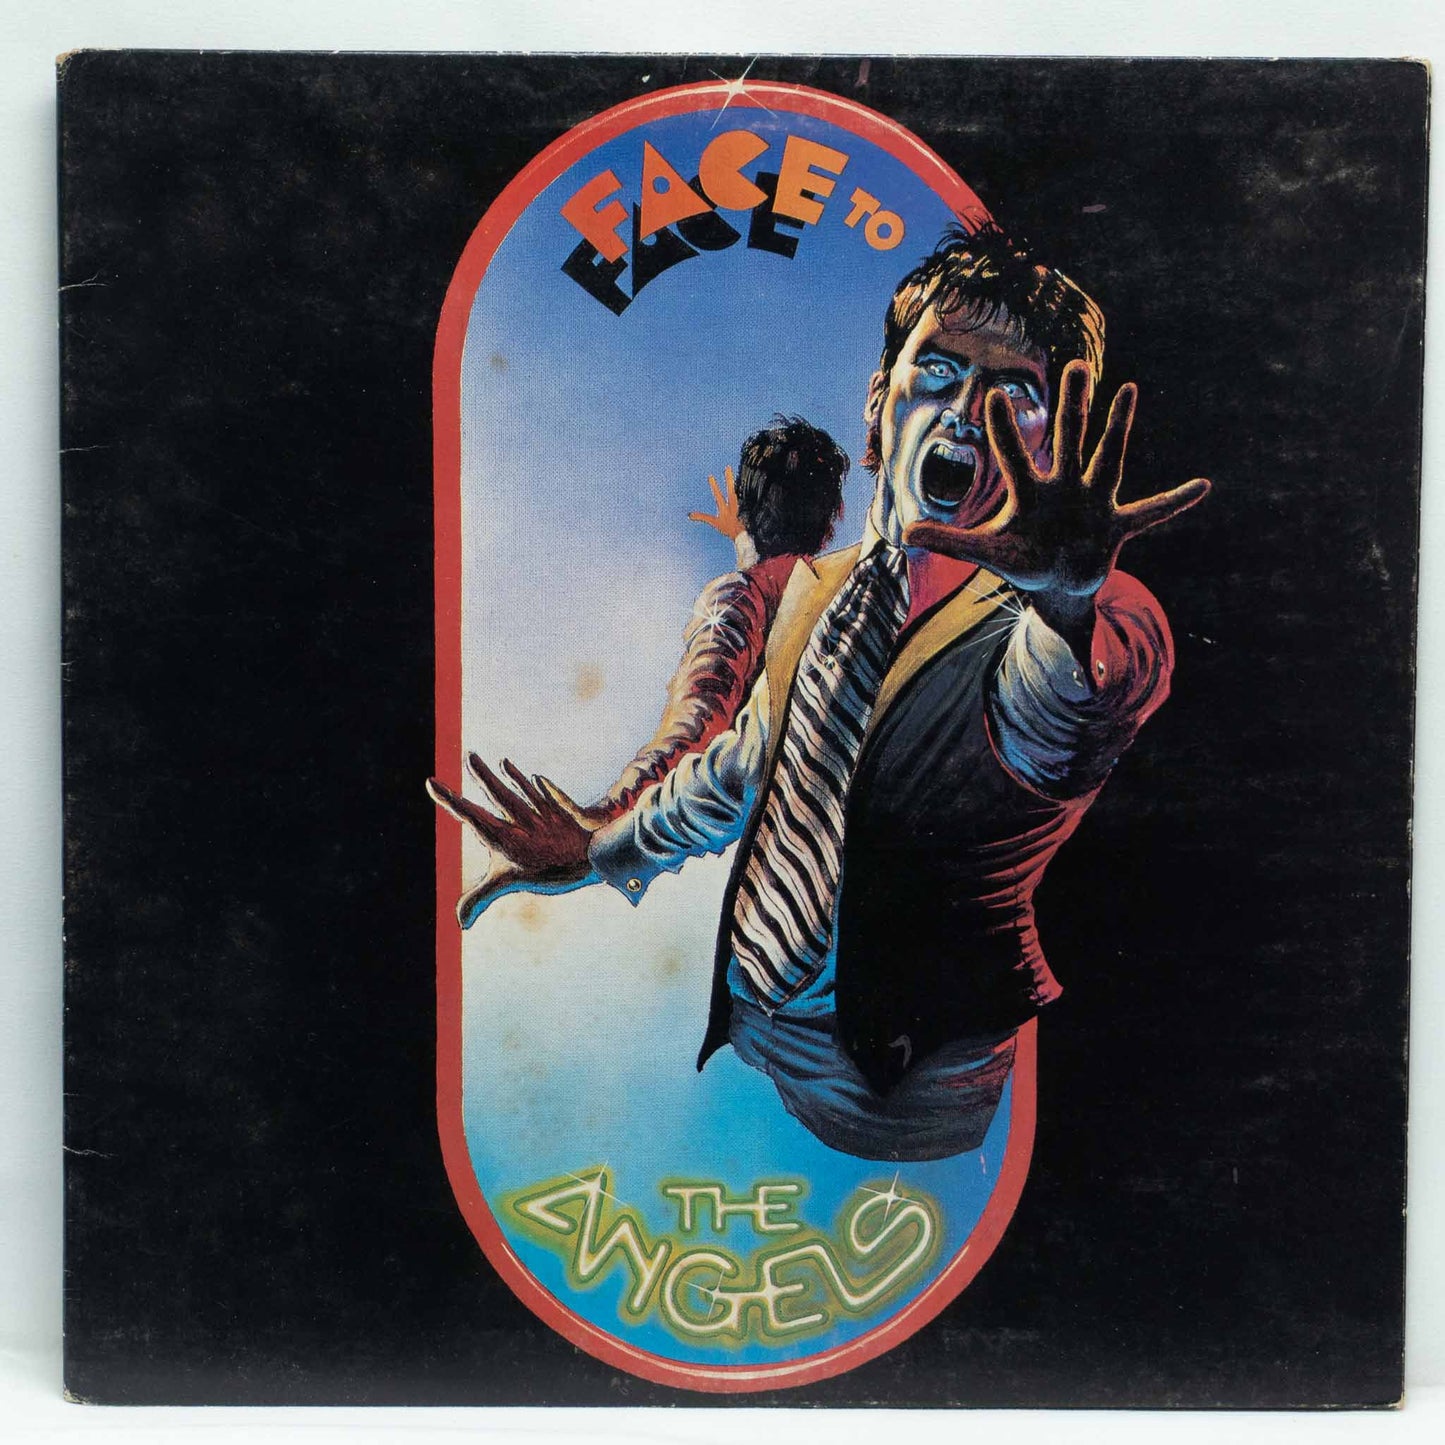 The Angels – Face To Face